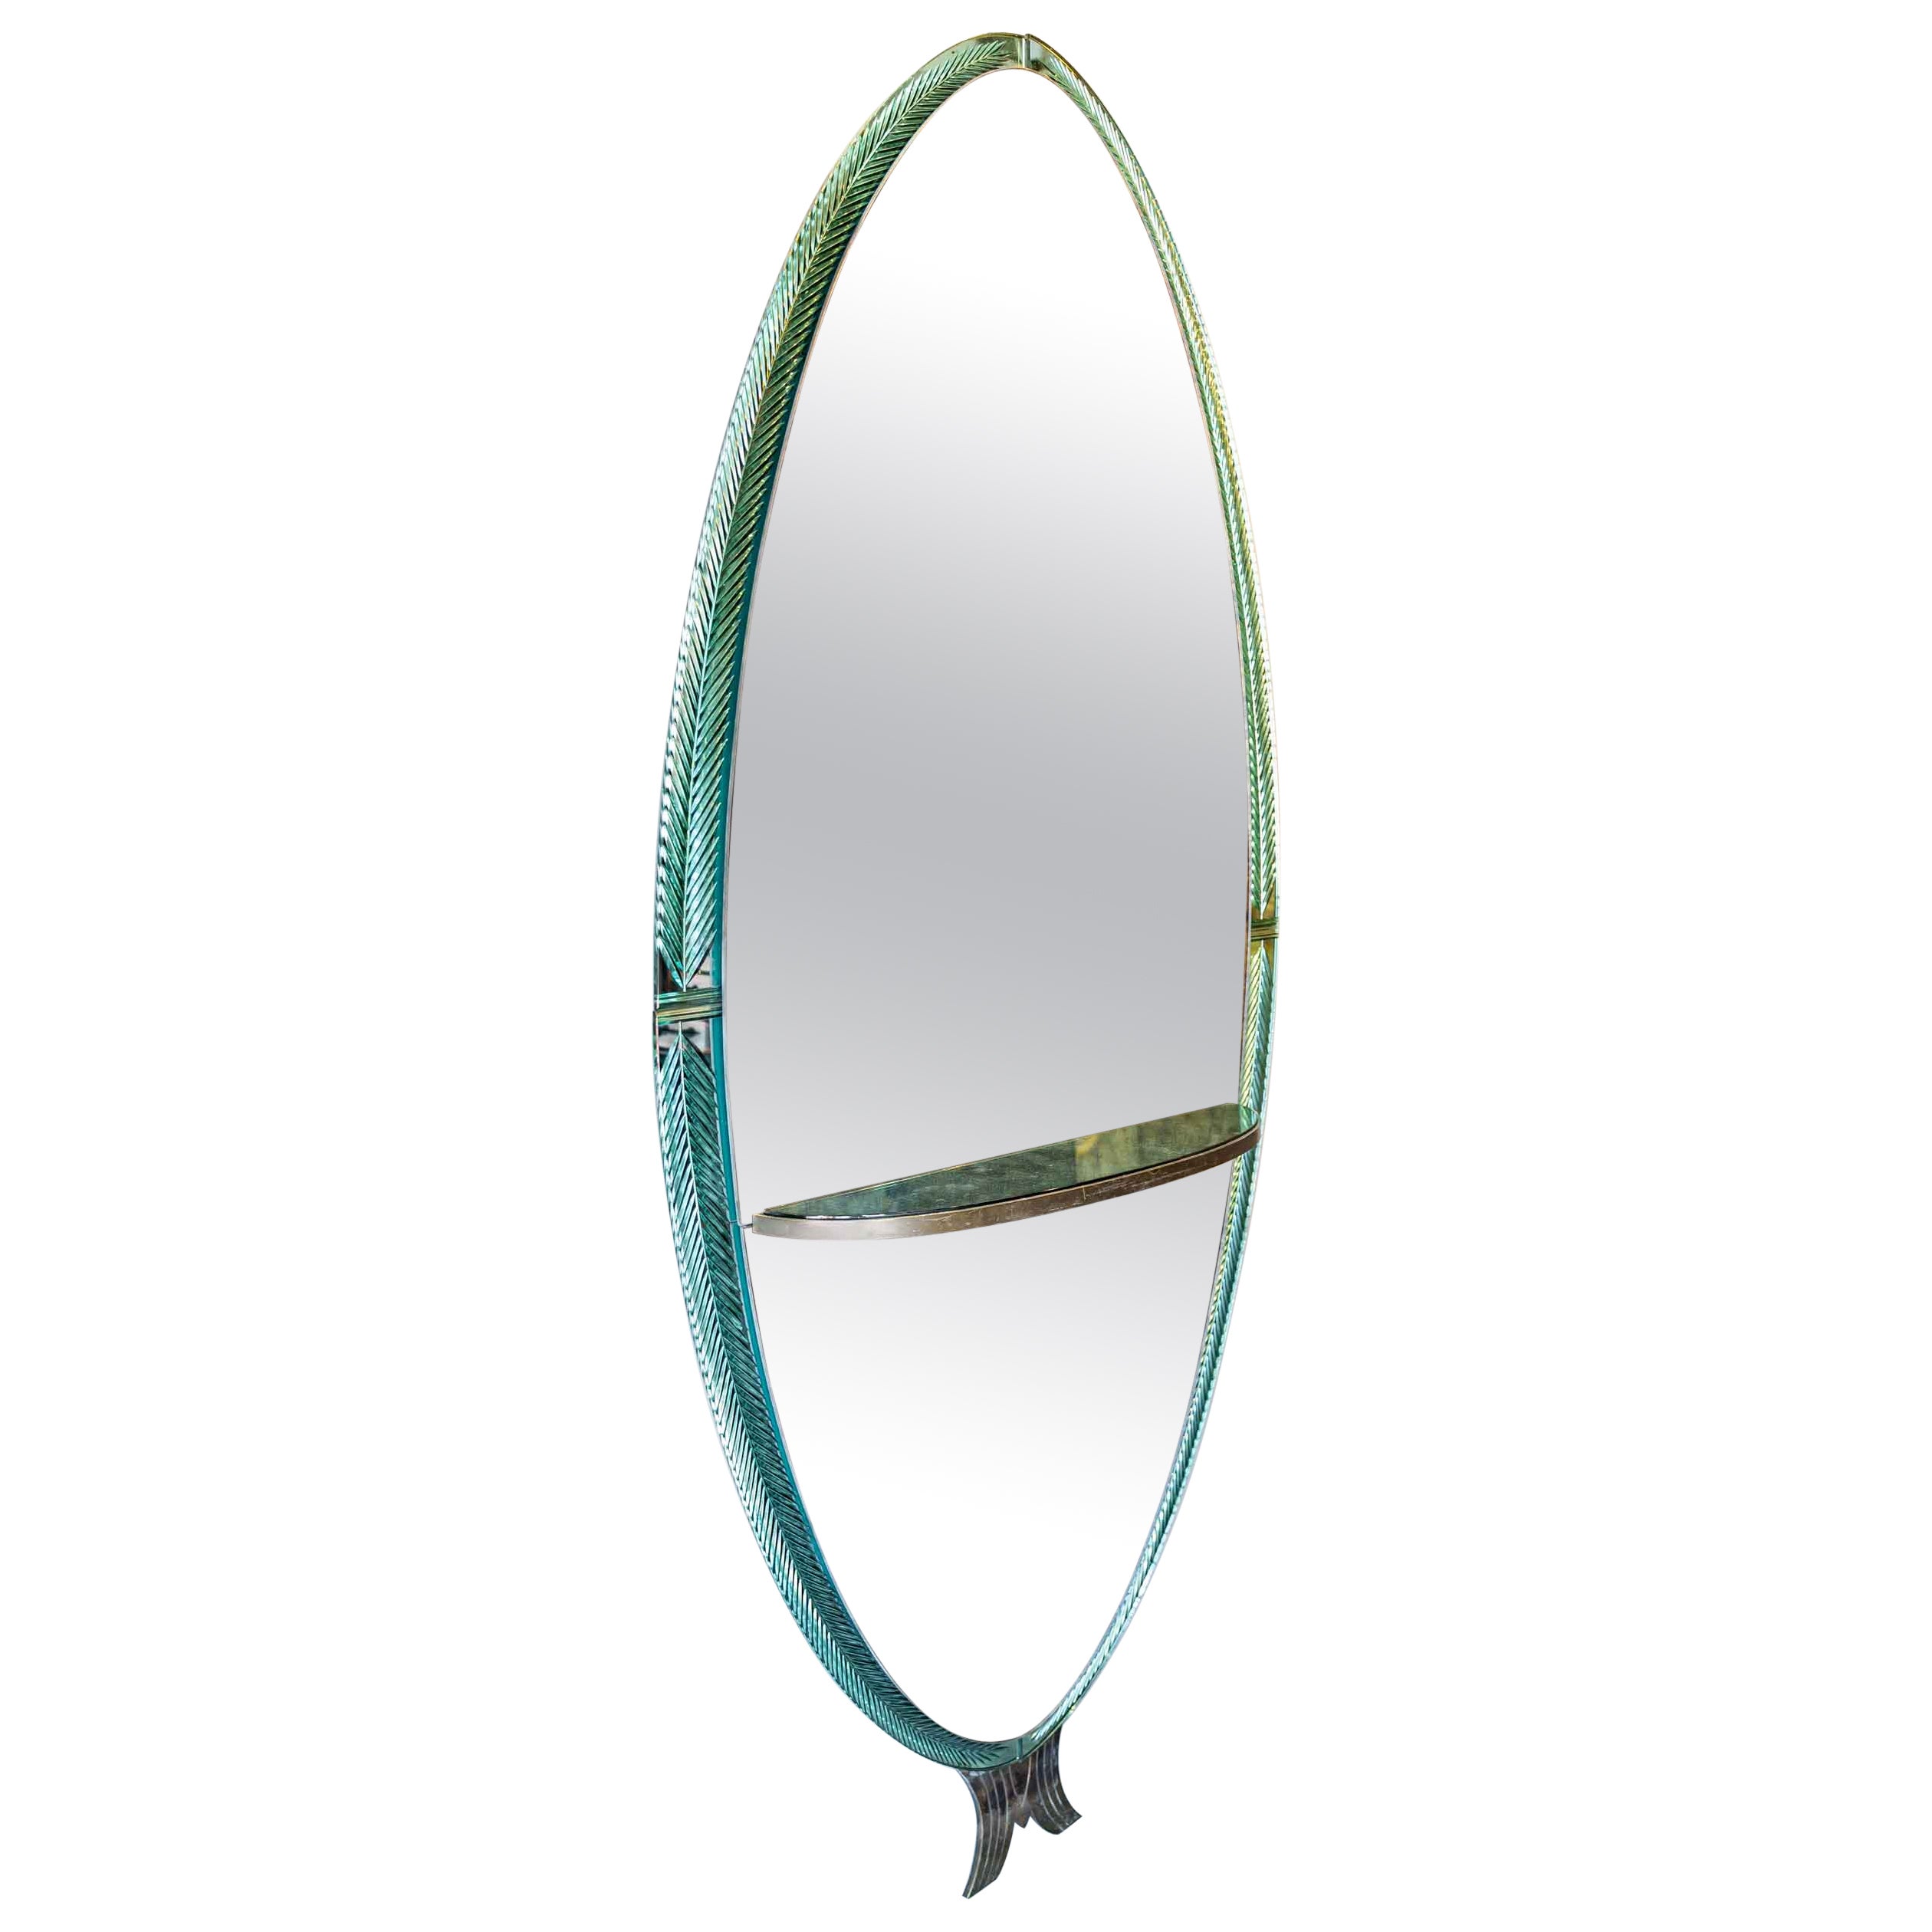 Large Oval Mirror And Its Bronze Console To Hang - Double Tint - Period Art Deco For Sale